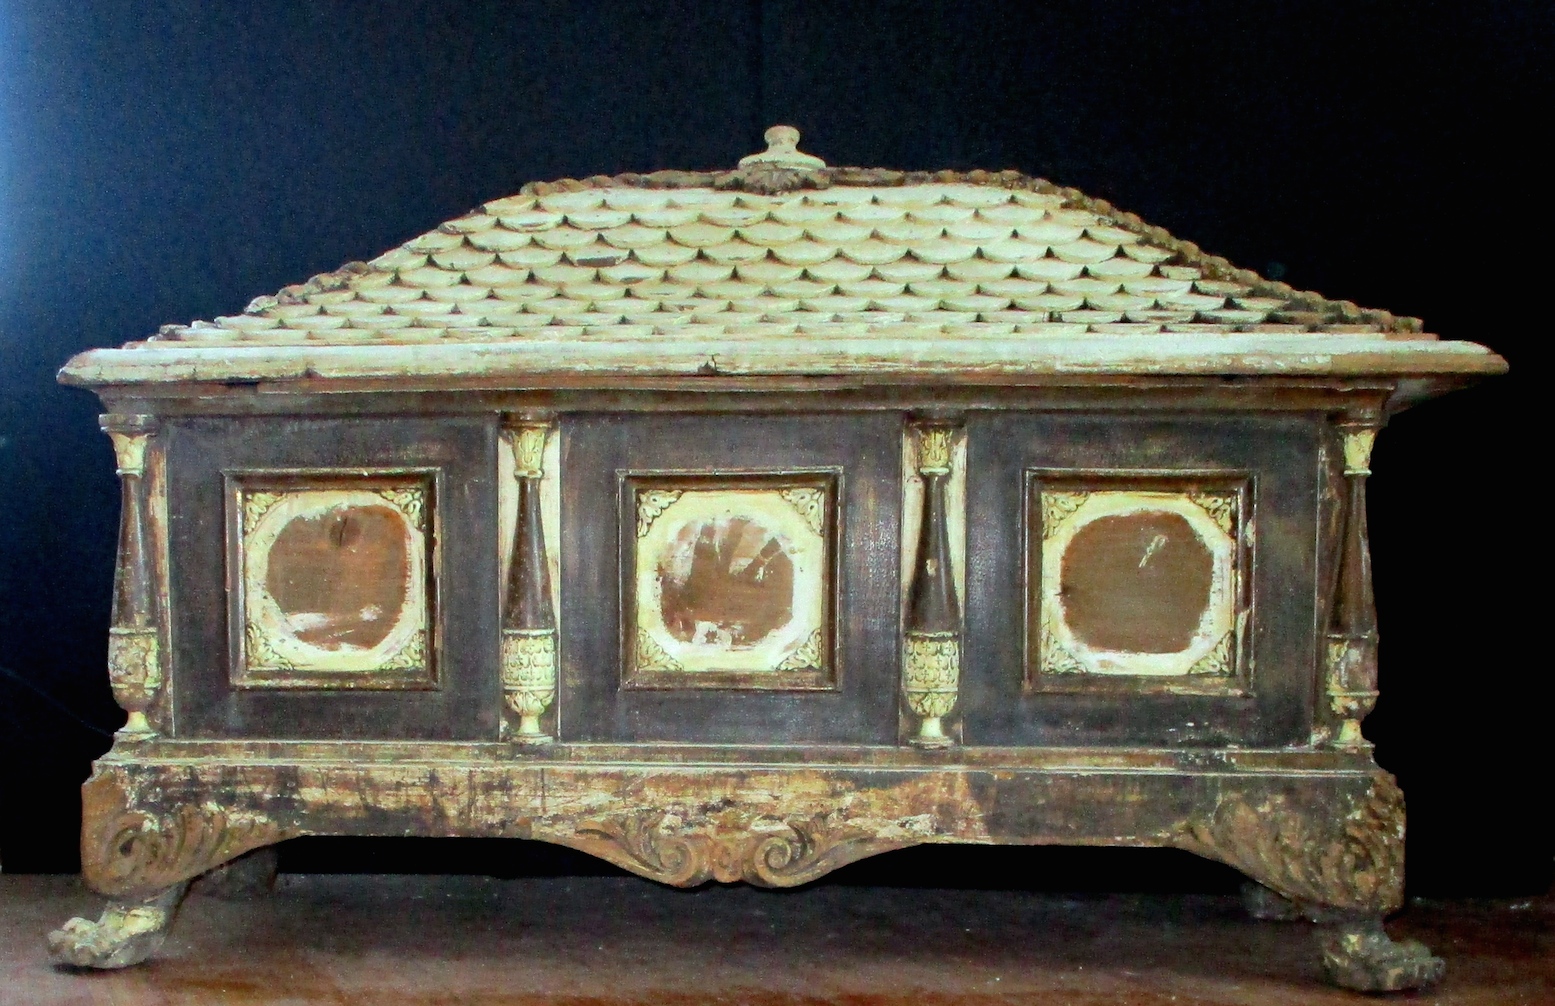 Very Early Italian "Cassone" Chest (As Found) - (We Will Restore to Your Specifications)(56" W x 36" H x 24" D) 